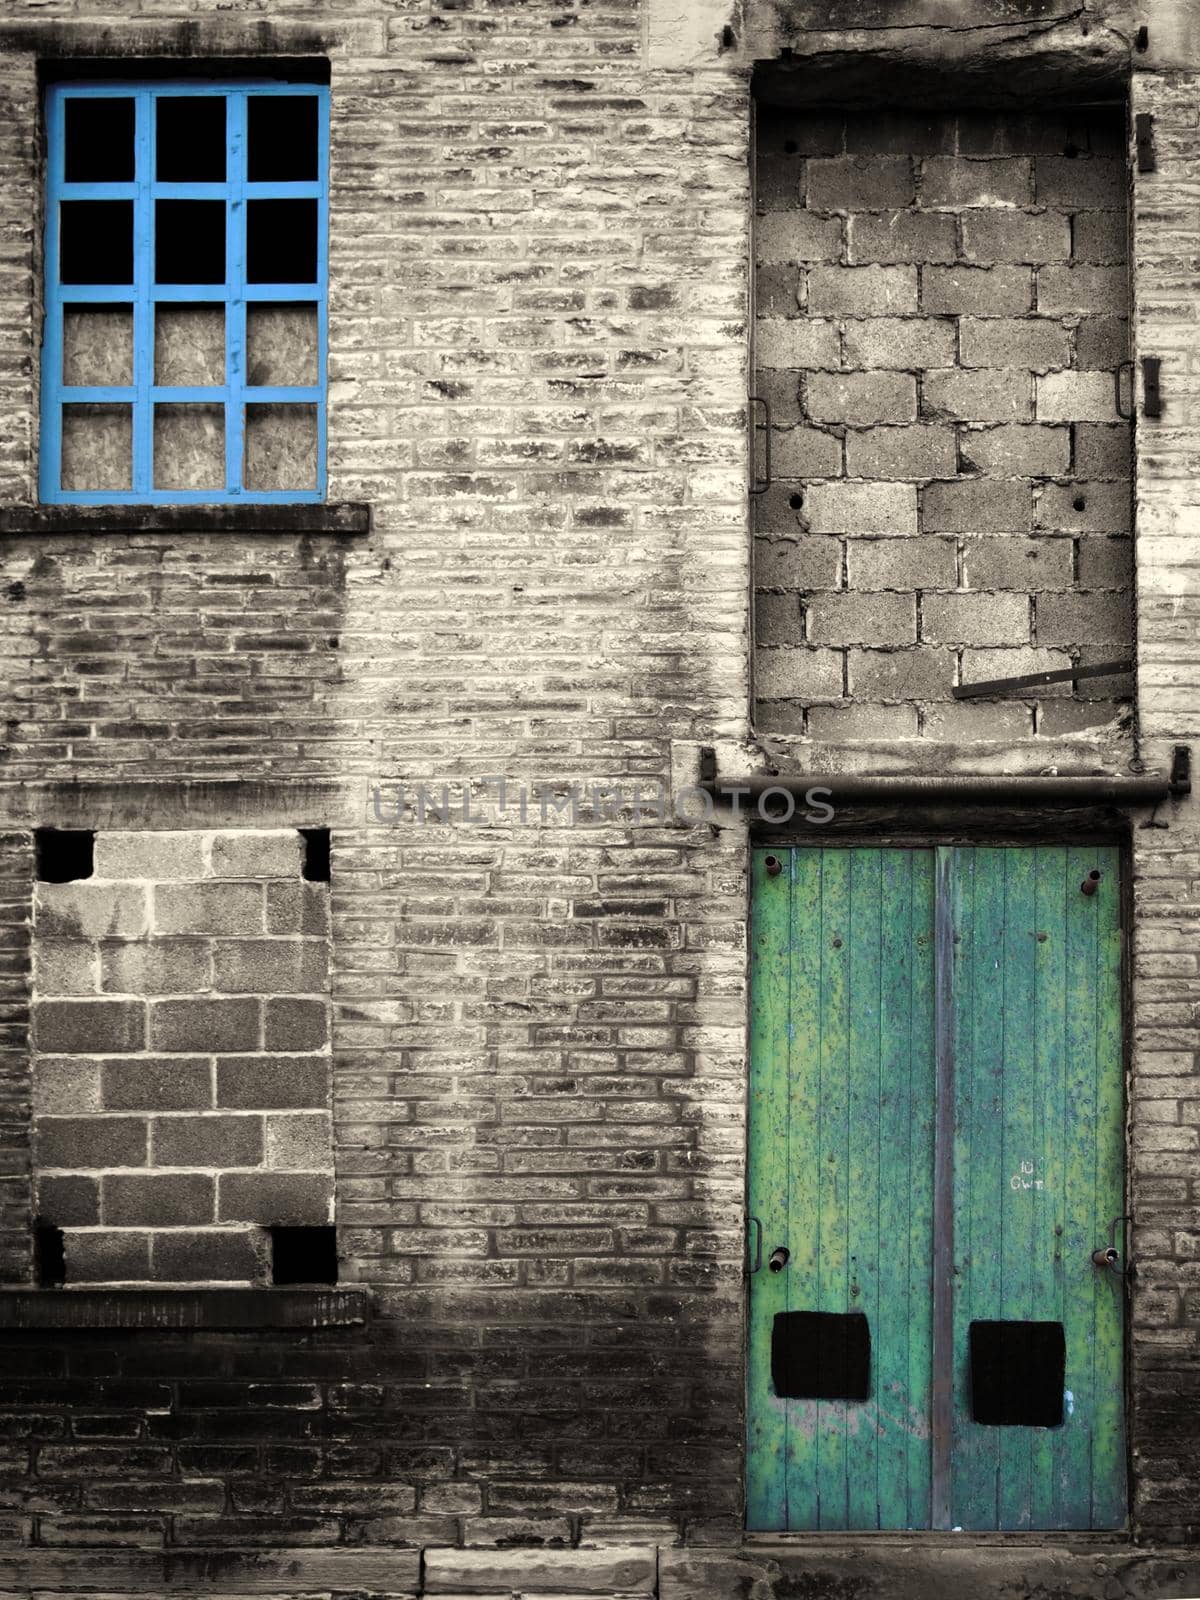 vintage style colorized image of an abandoned industrial warehouse and factory building with blue windows and green door by philopenshaw